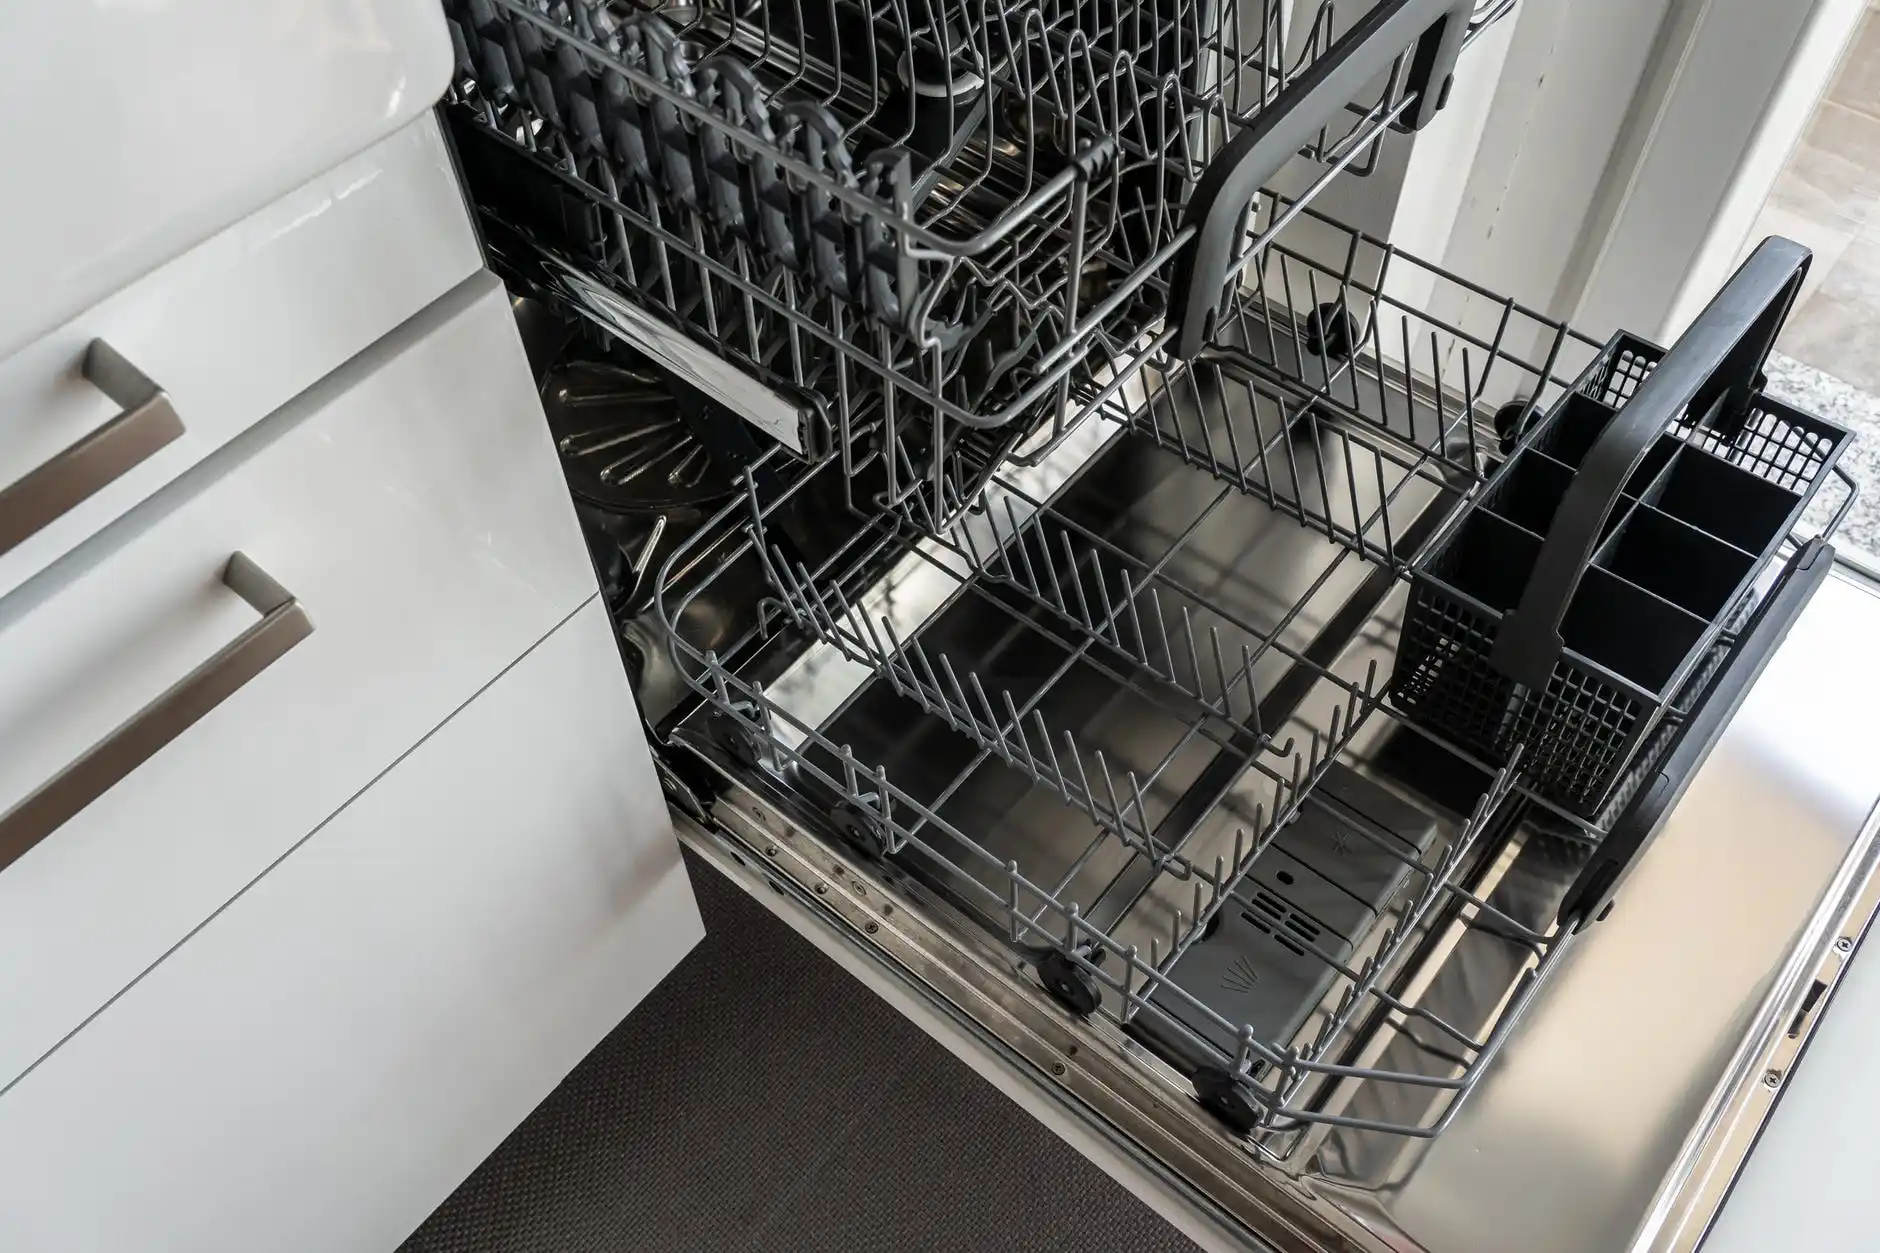 How to Fix Samsung Dishwasher Not Draining